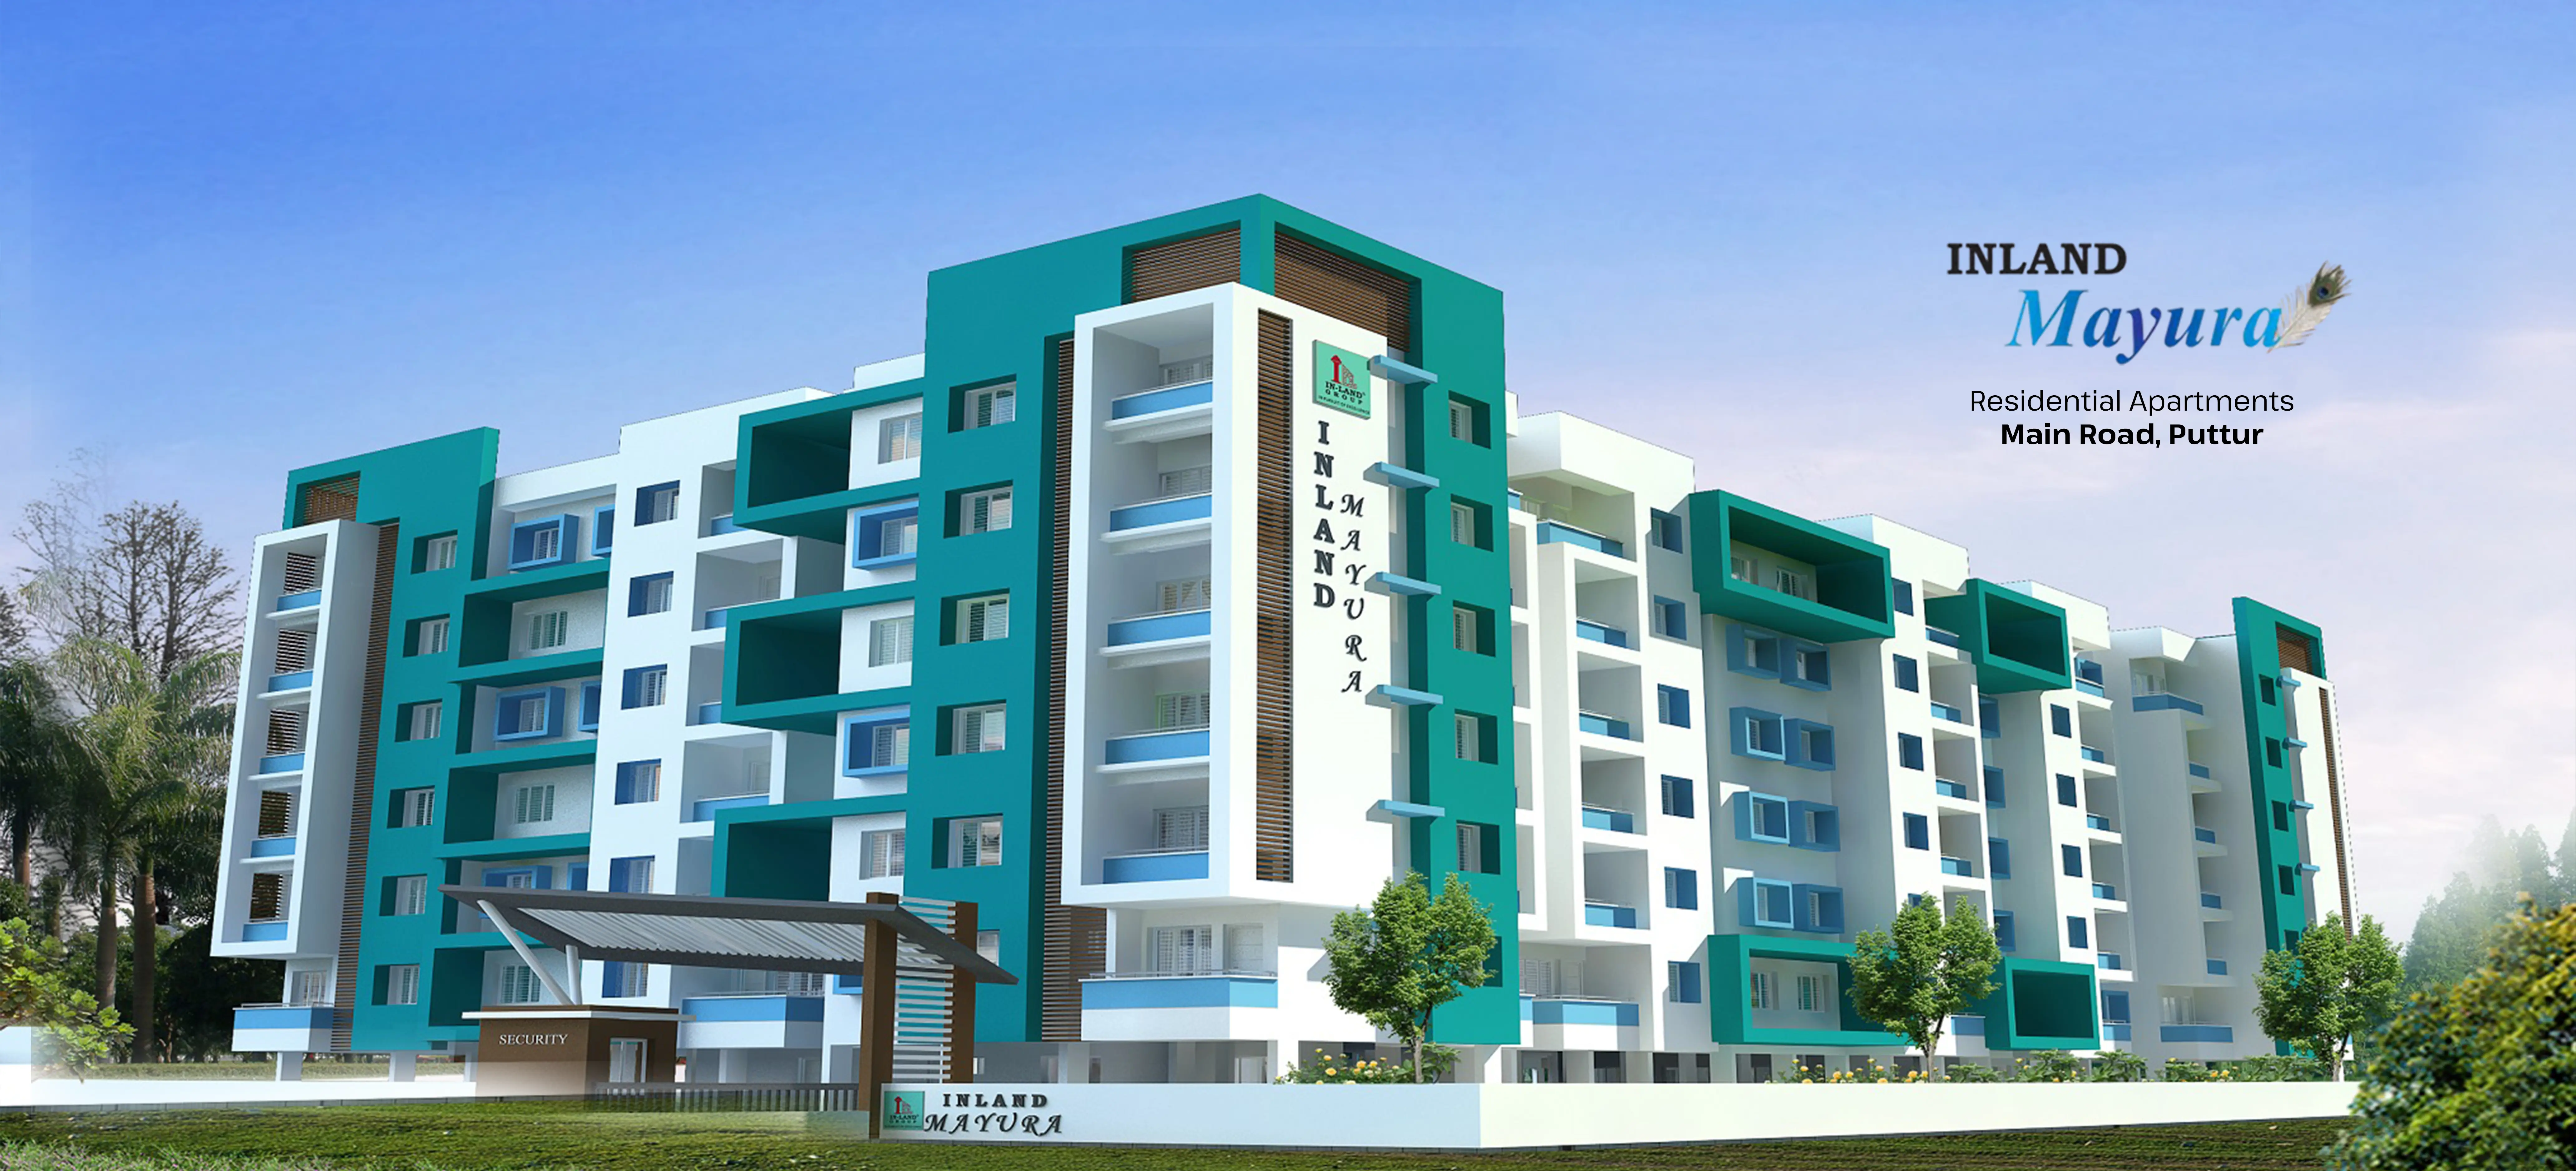 IN-LAND Mayura- Residential Complex and Shopping Mall in Puttur